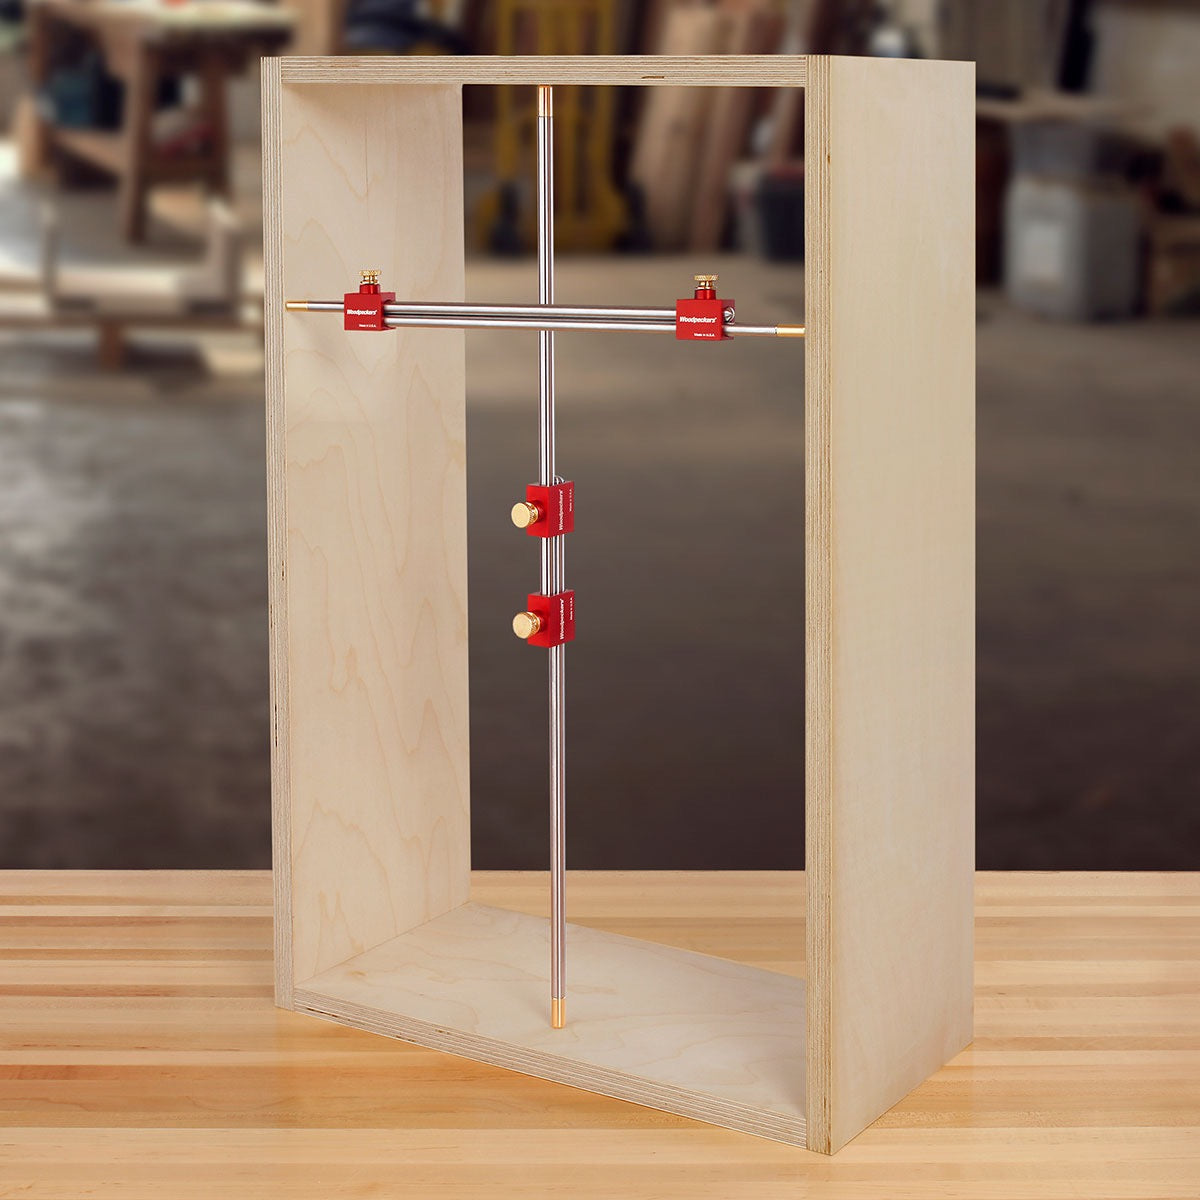 Woodpeckers Modular Bar Gauge Systems taking inside measurements of cabinet